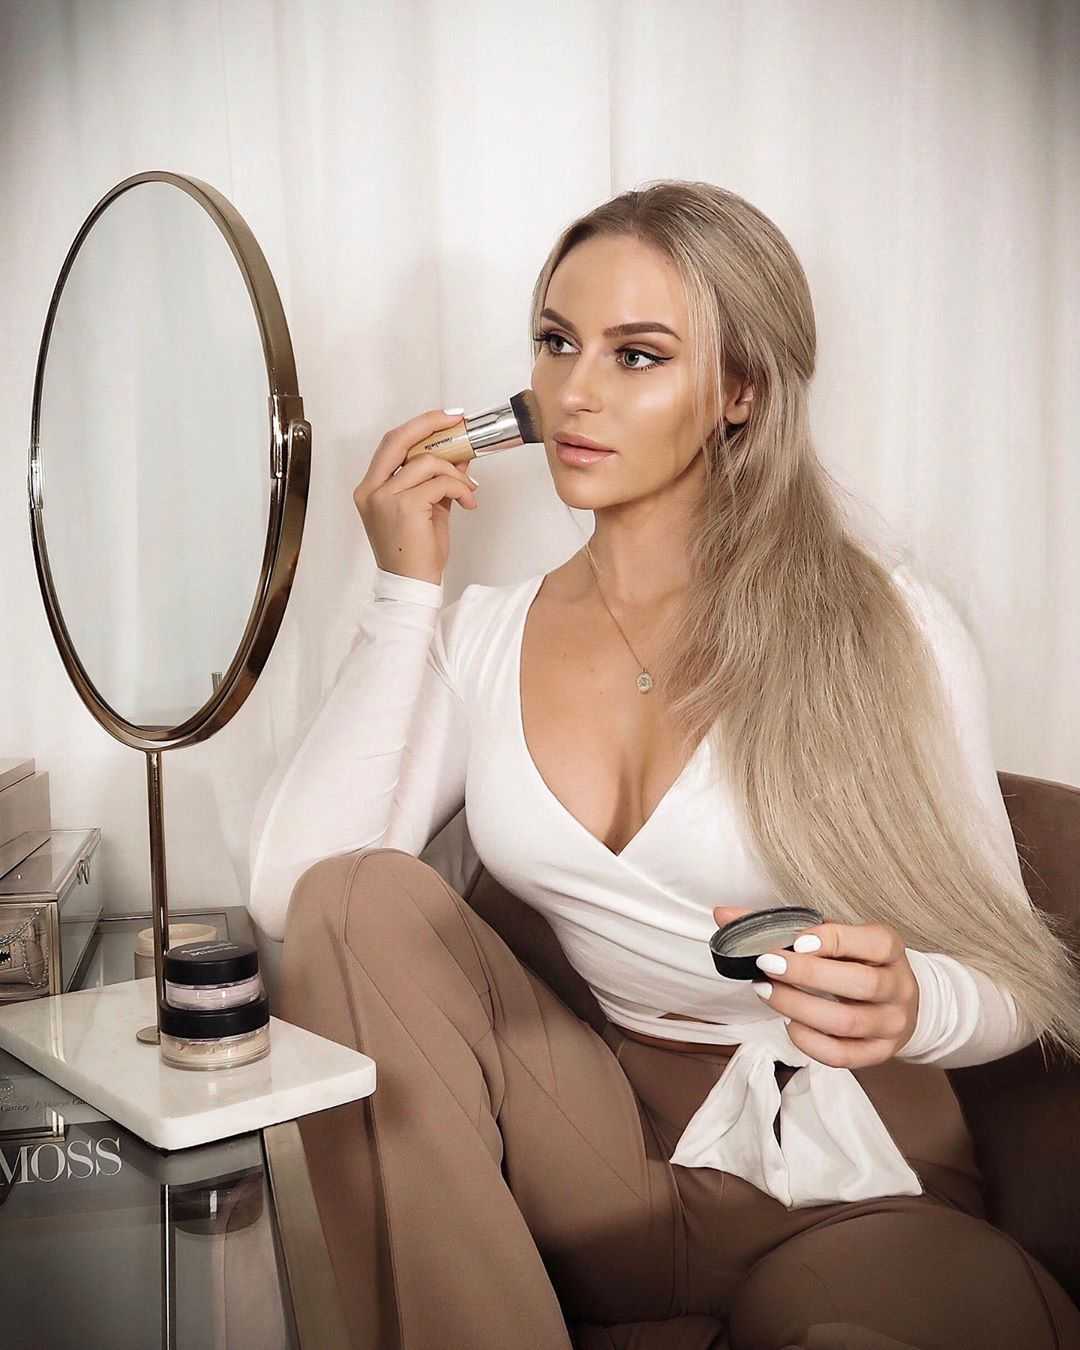 75+ Hot Pictures Of Anna Nystrom Which Expose Her Sexy Body | Best Of Comic Books